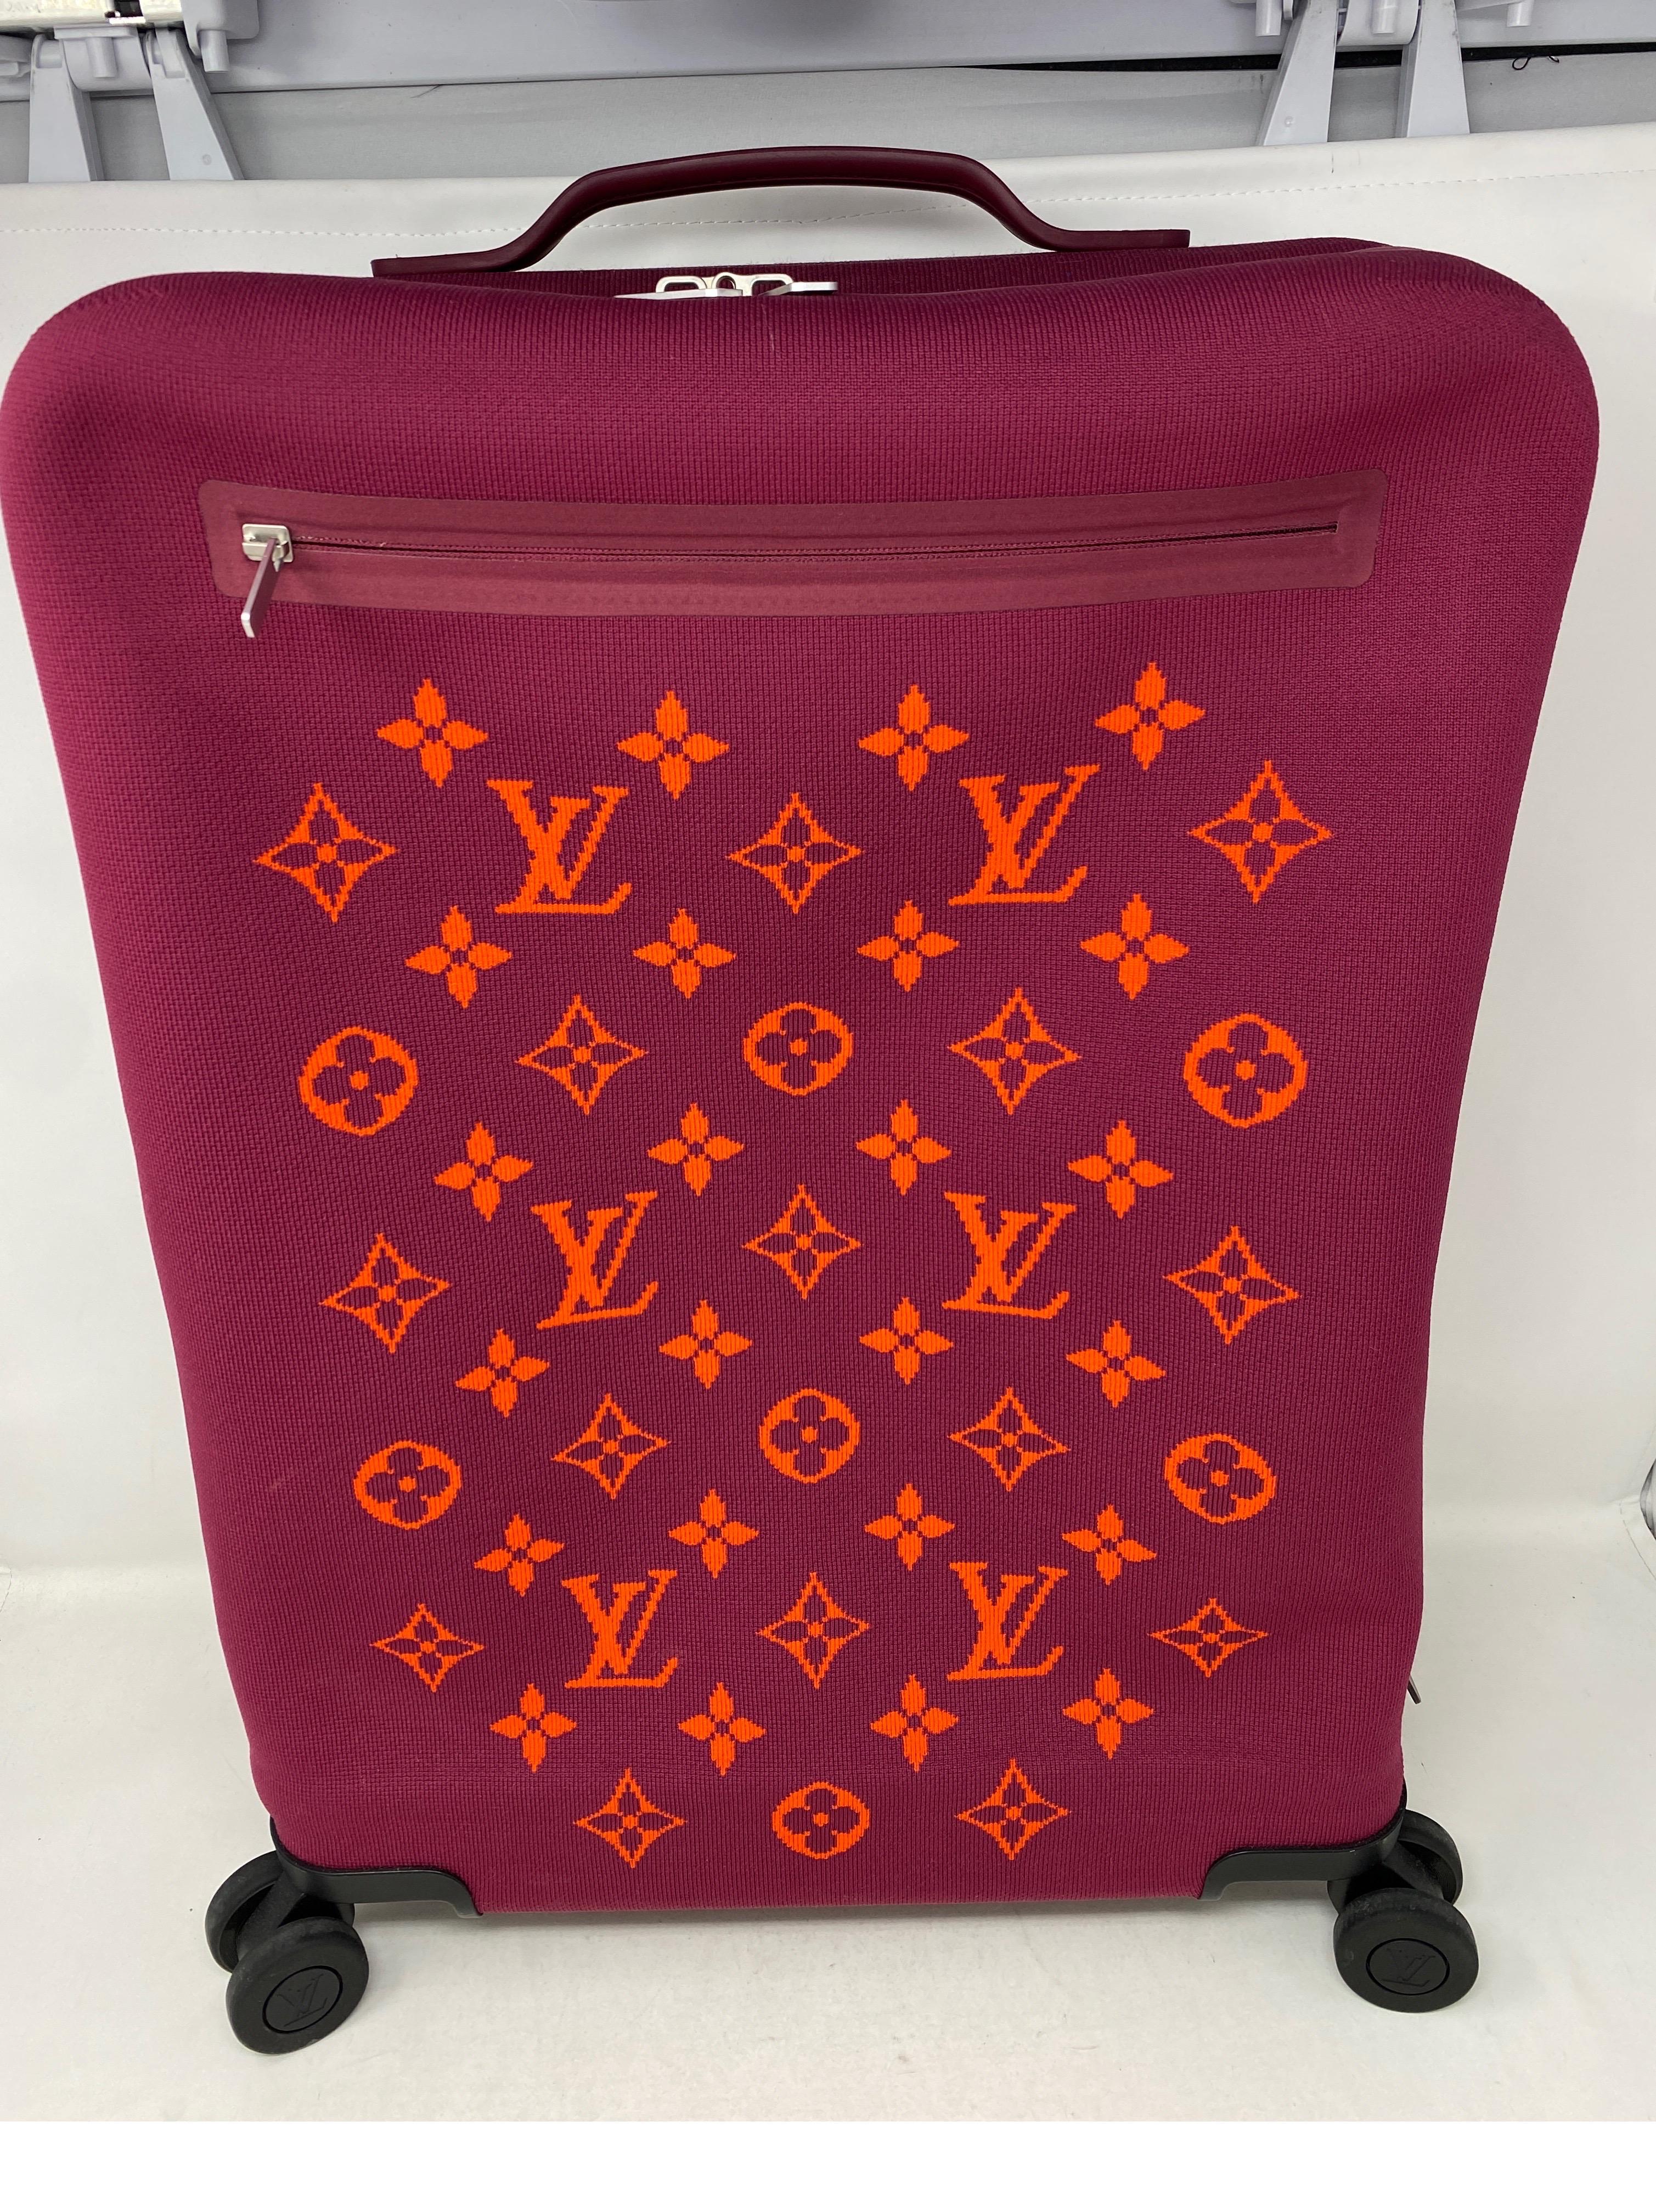 Louis Vuitton Purple and Orange Limited Edition Roller Suitcase. Cool design and cotton jersey material on suitcase. Excellent like new condition. Collector's piece. Carry on size. Travel in style. Guaranteed authentic. 